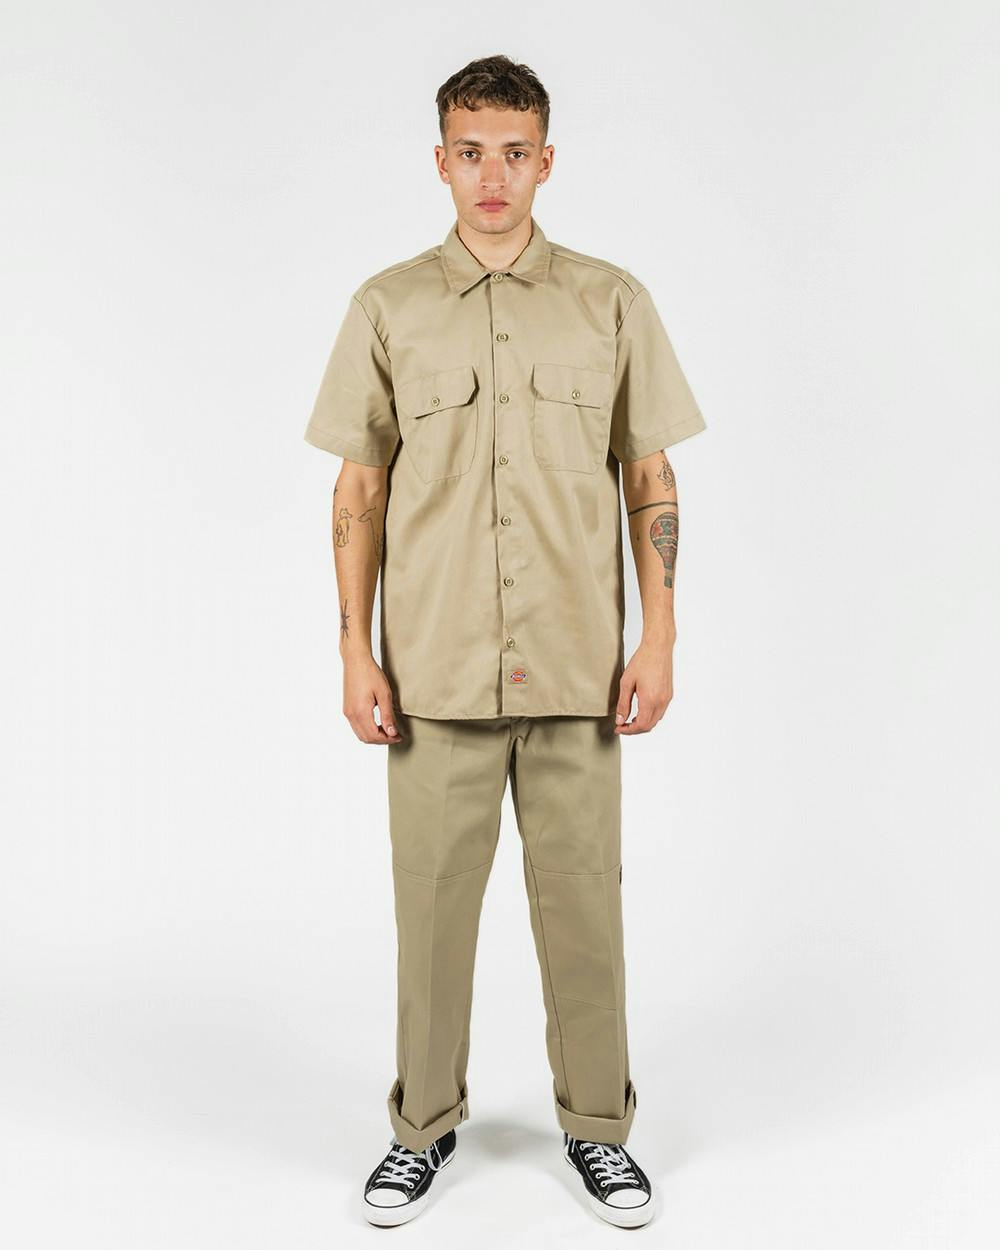 dickies work shirt and pants - OFF-54% >Free Delivery